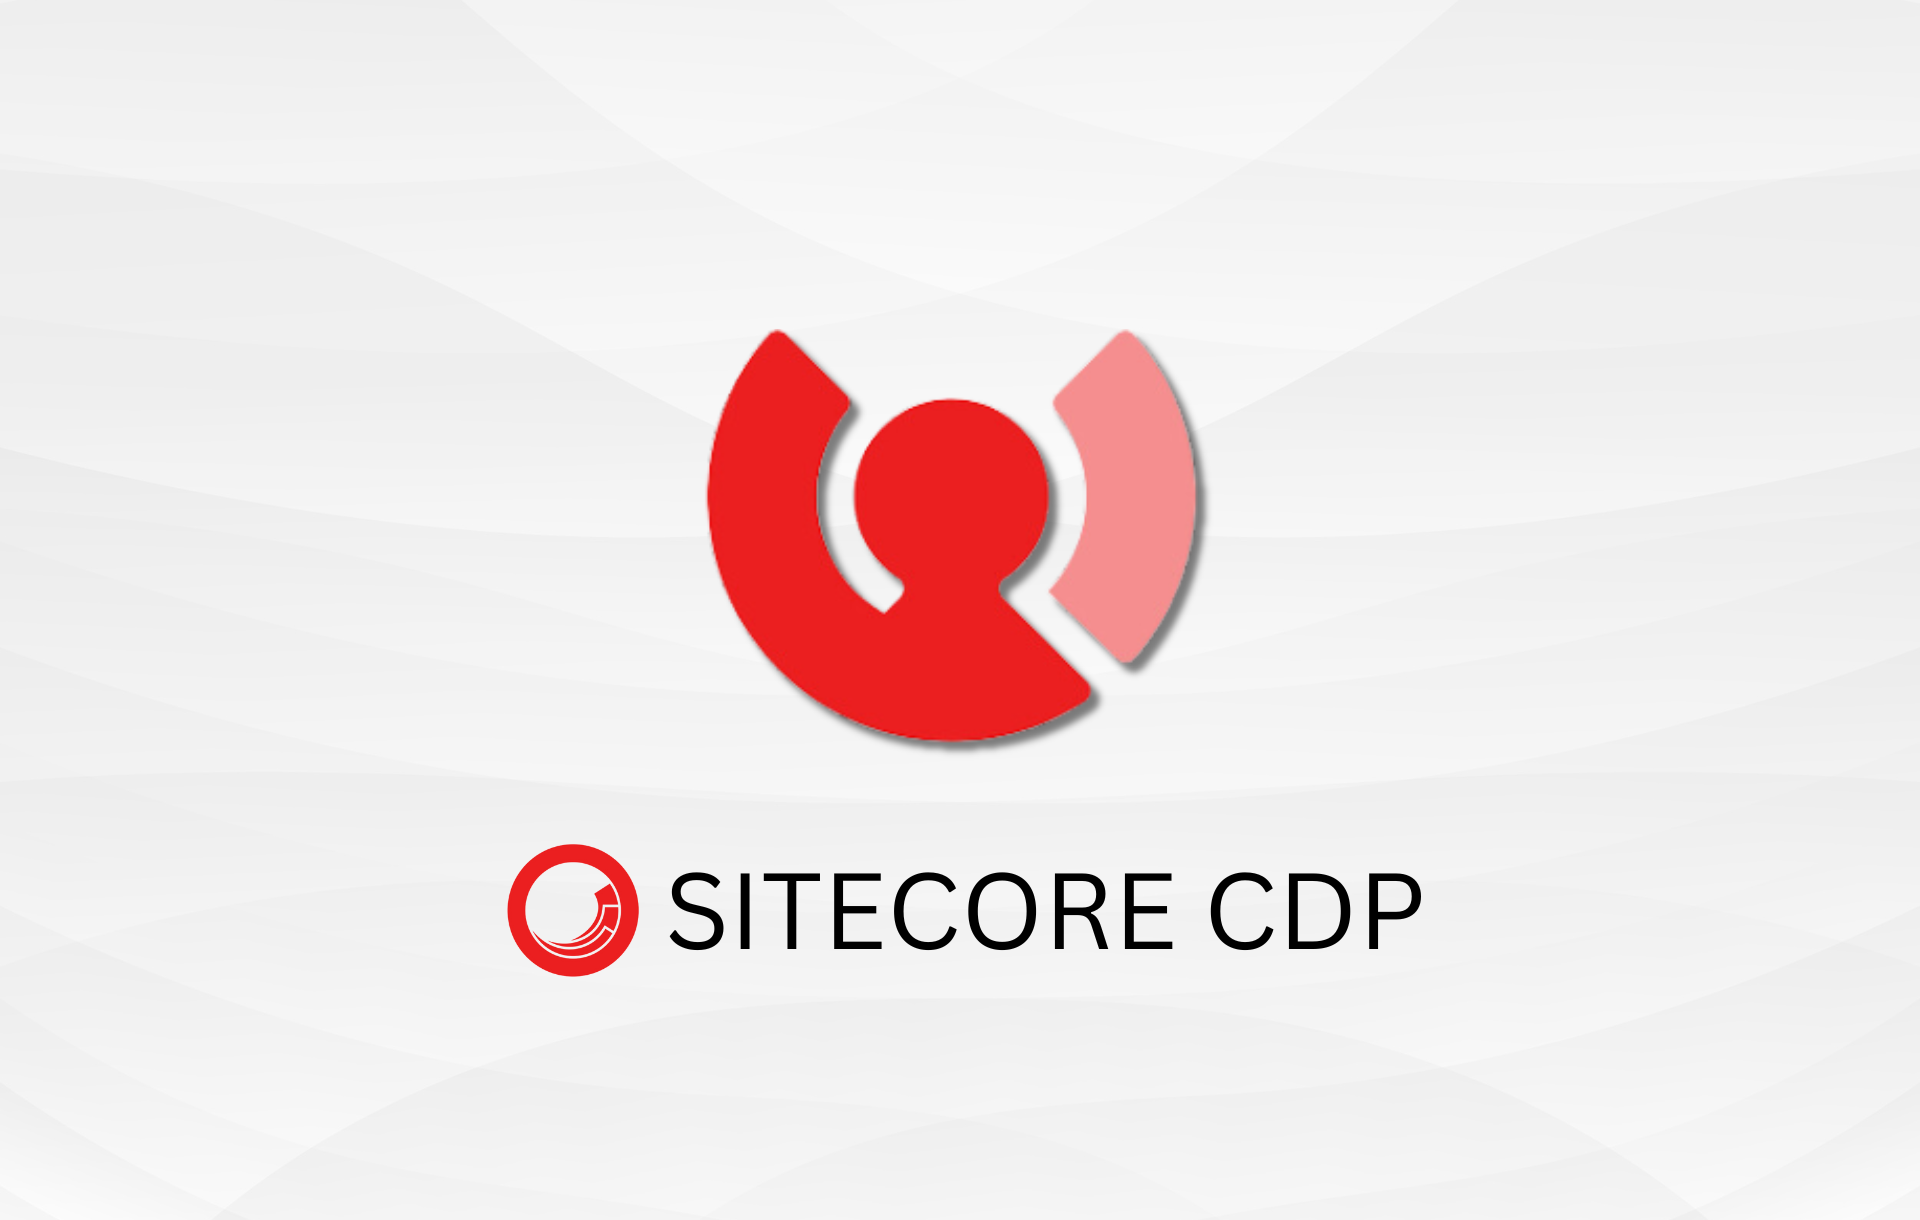 How can Sitecore CDP Enrich the B2C Business User Experience?